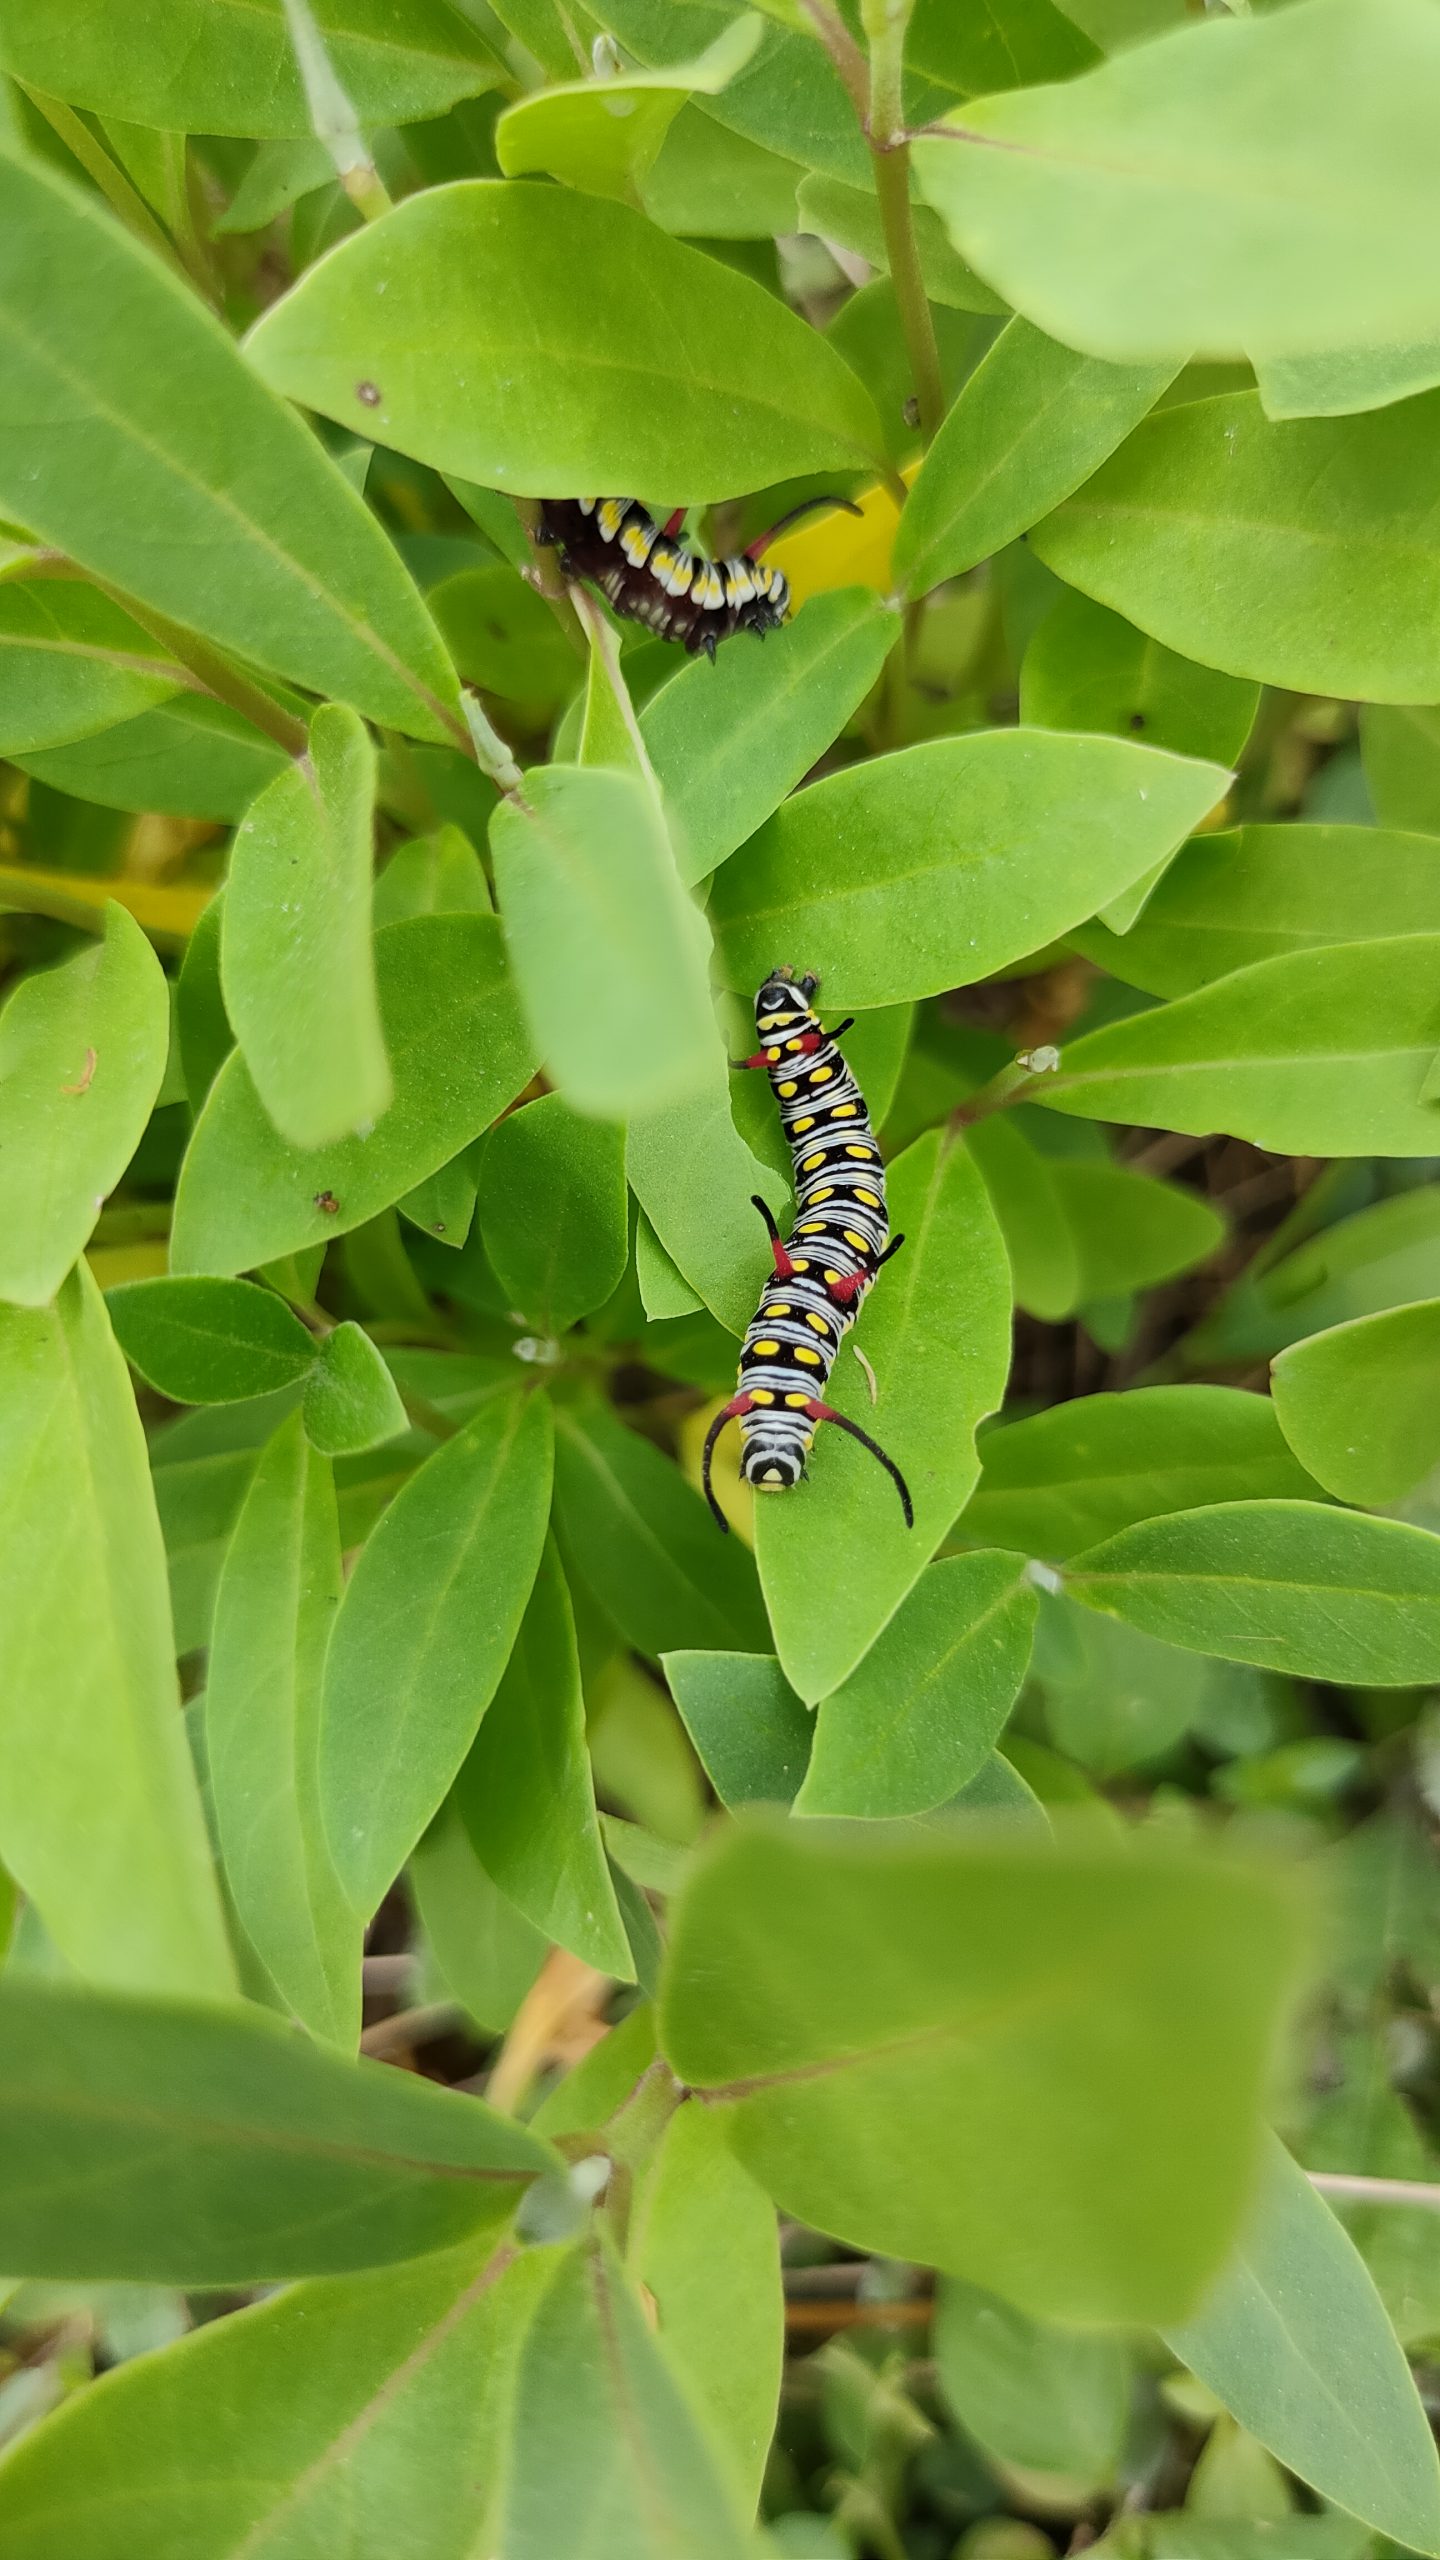 A caterpillar on a plant